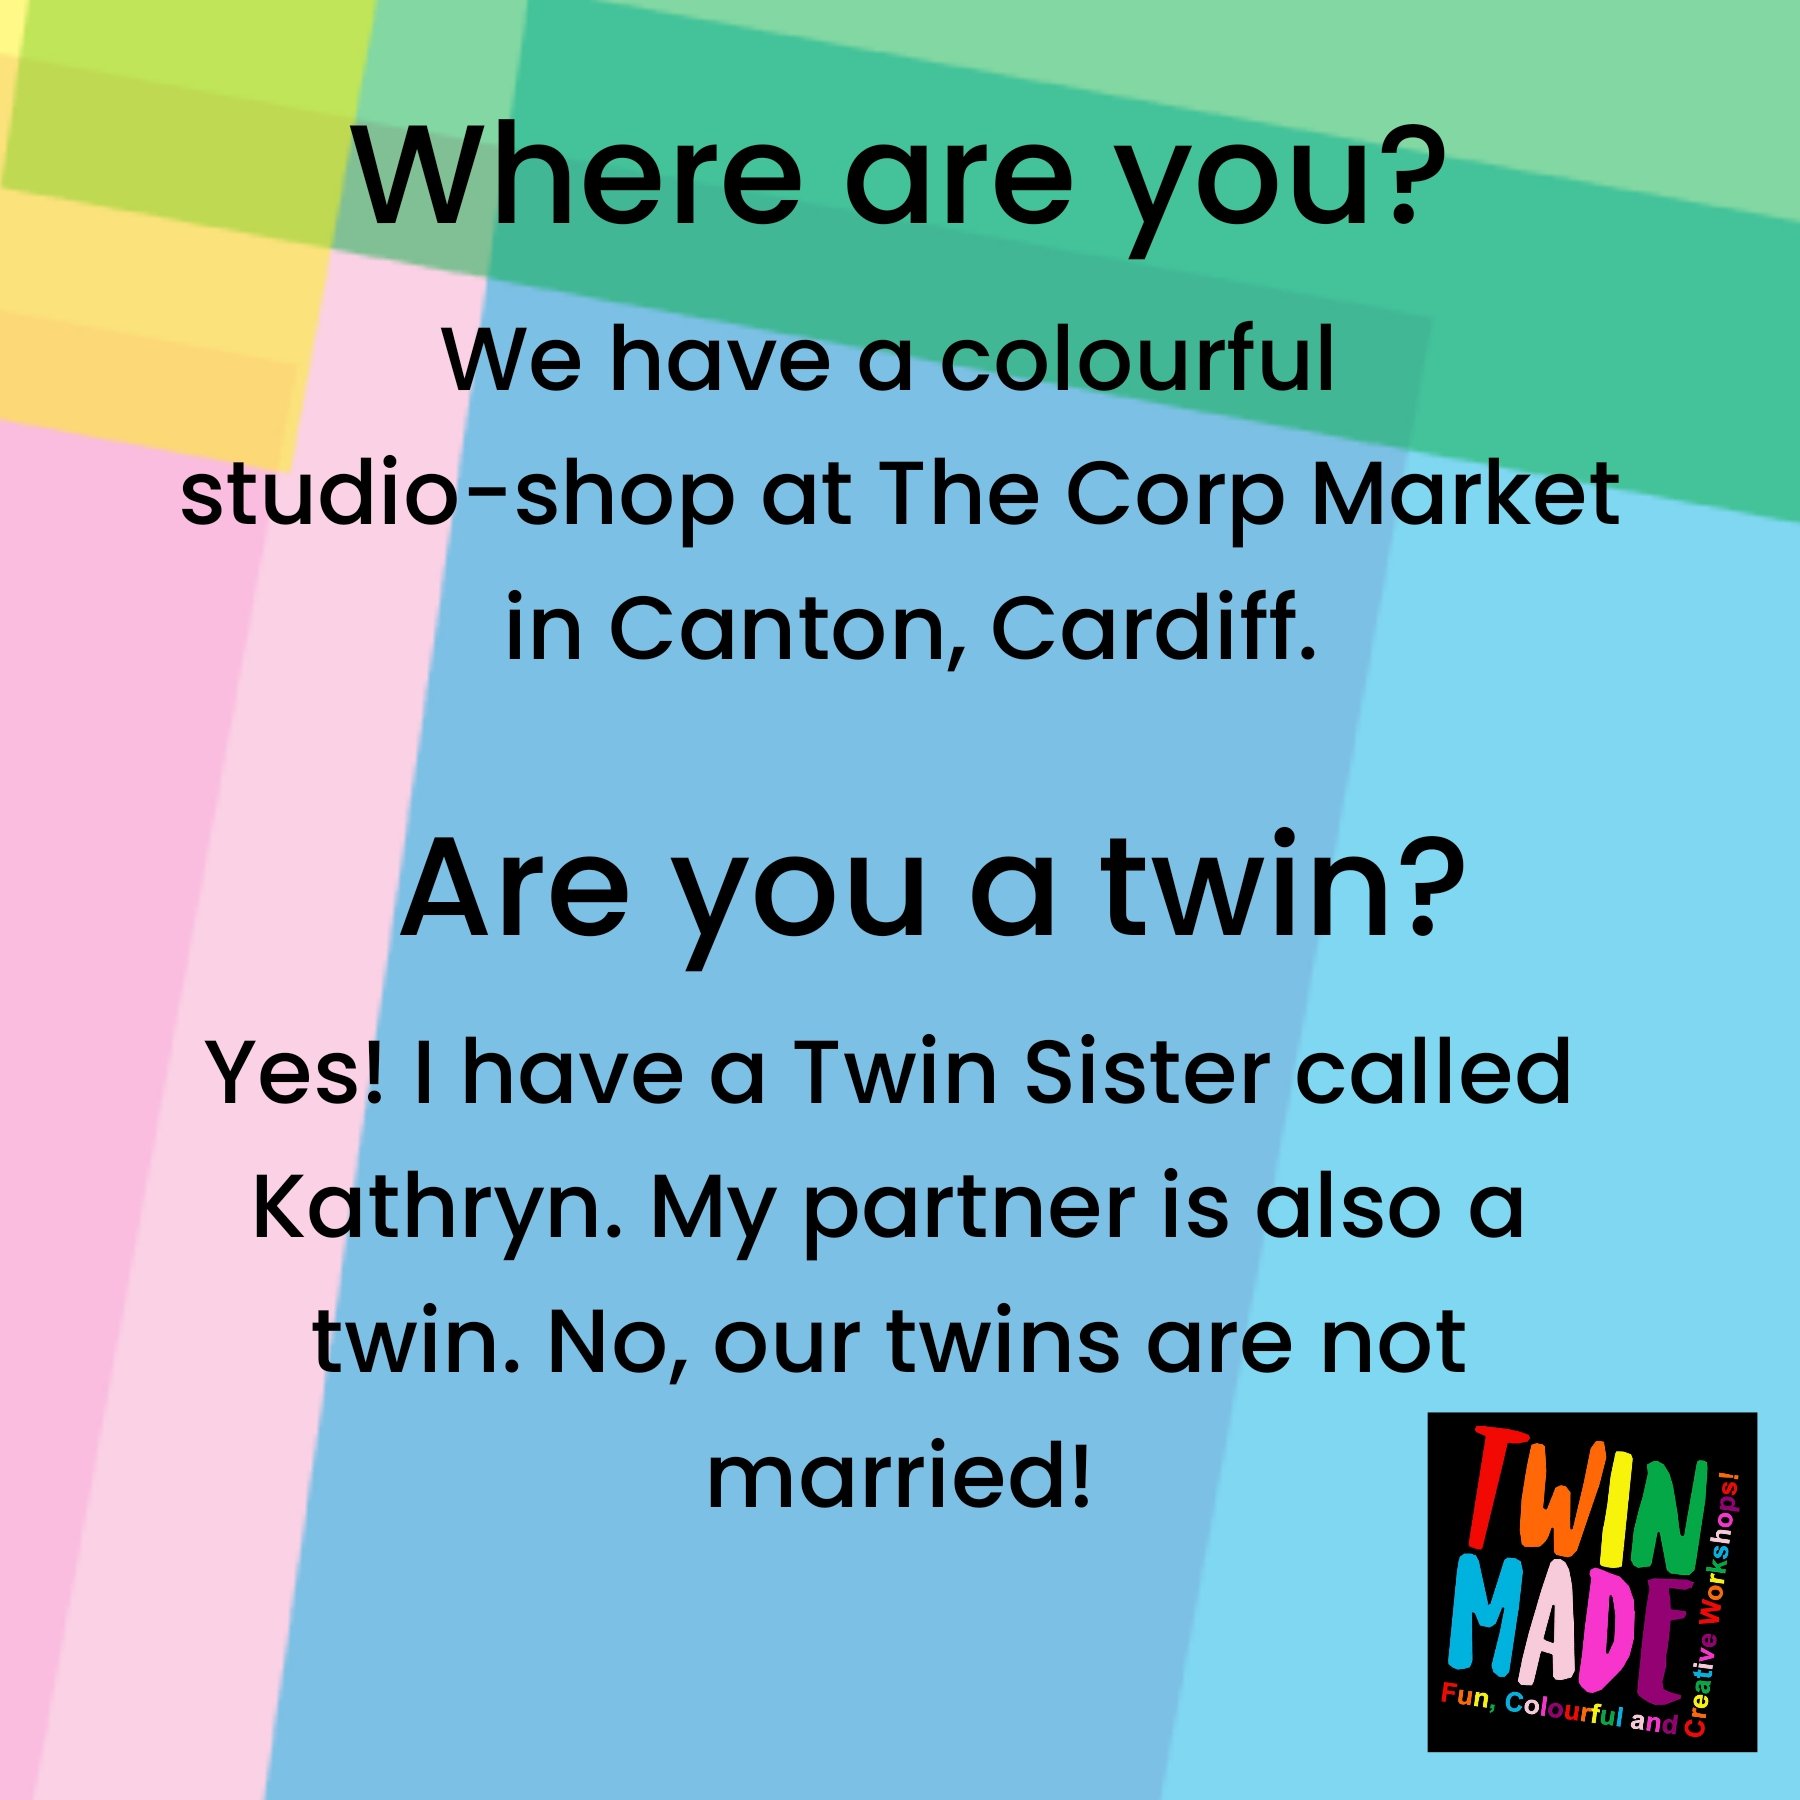 Where are you? Are you a twin?